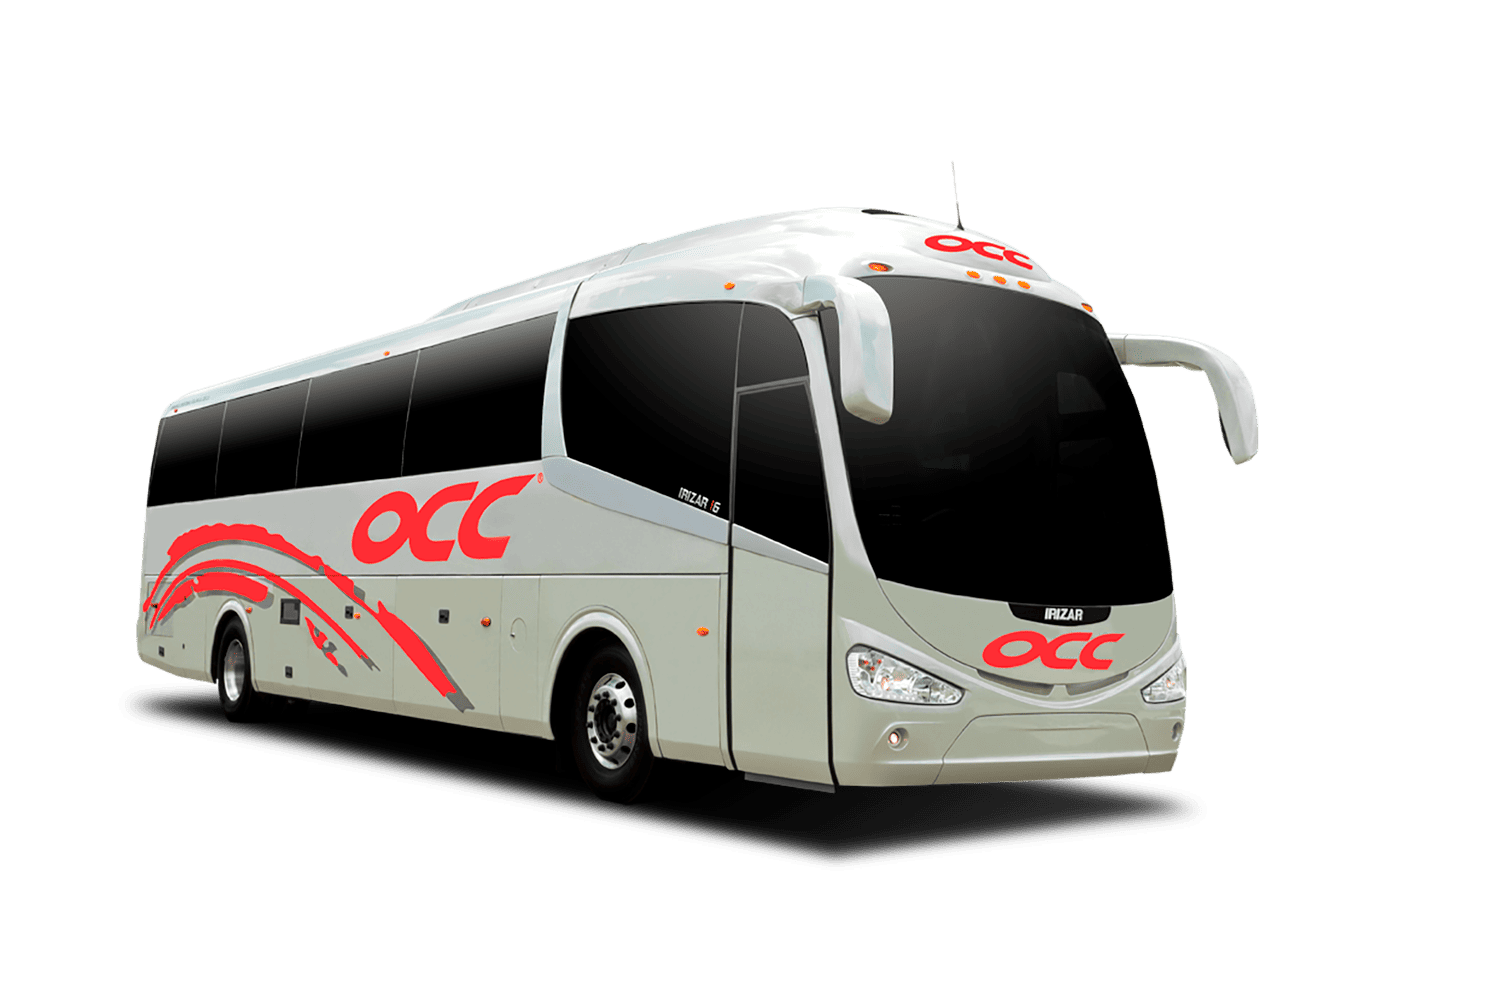 How To Get From Playa del Carmen to Campeche By Bus - All Possible Ways, cheapest way from Playa del Carmen to Campeche, Playa del Carmen to Campeche, OCC bus from Playa del Carmen to Campeche, ado bus from Playa del Carmen to Campeche, shared van from Playa del Carmen to Campeche, Colectivo from Playa del Carmen to Campeche, Uber from Playa del Carmen to Campeche, taxi from Playa del Carmen to Campeche, Playa del Carmen to Campeche by plane